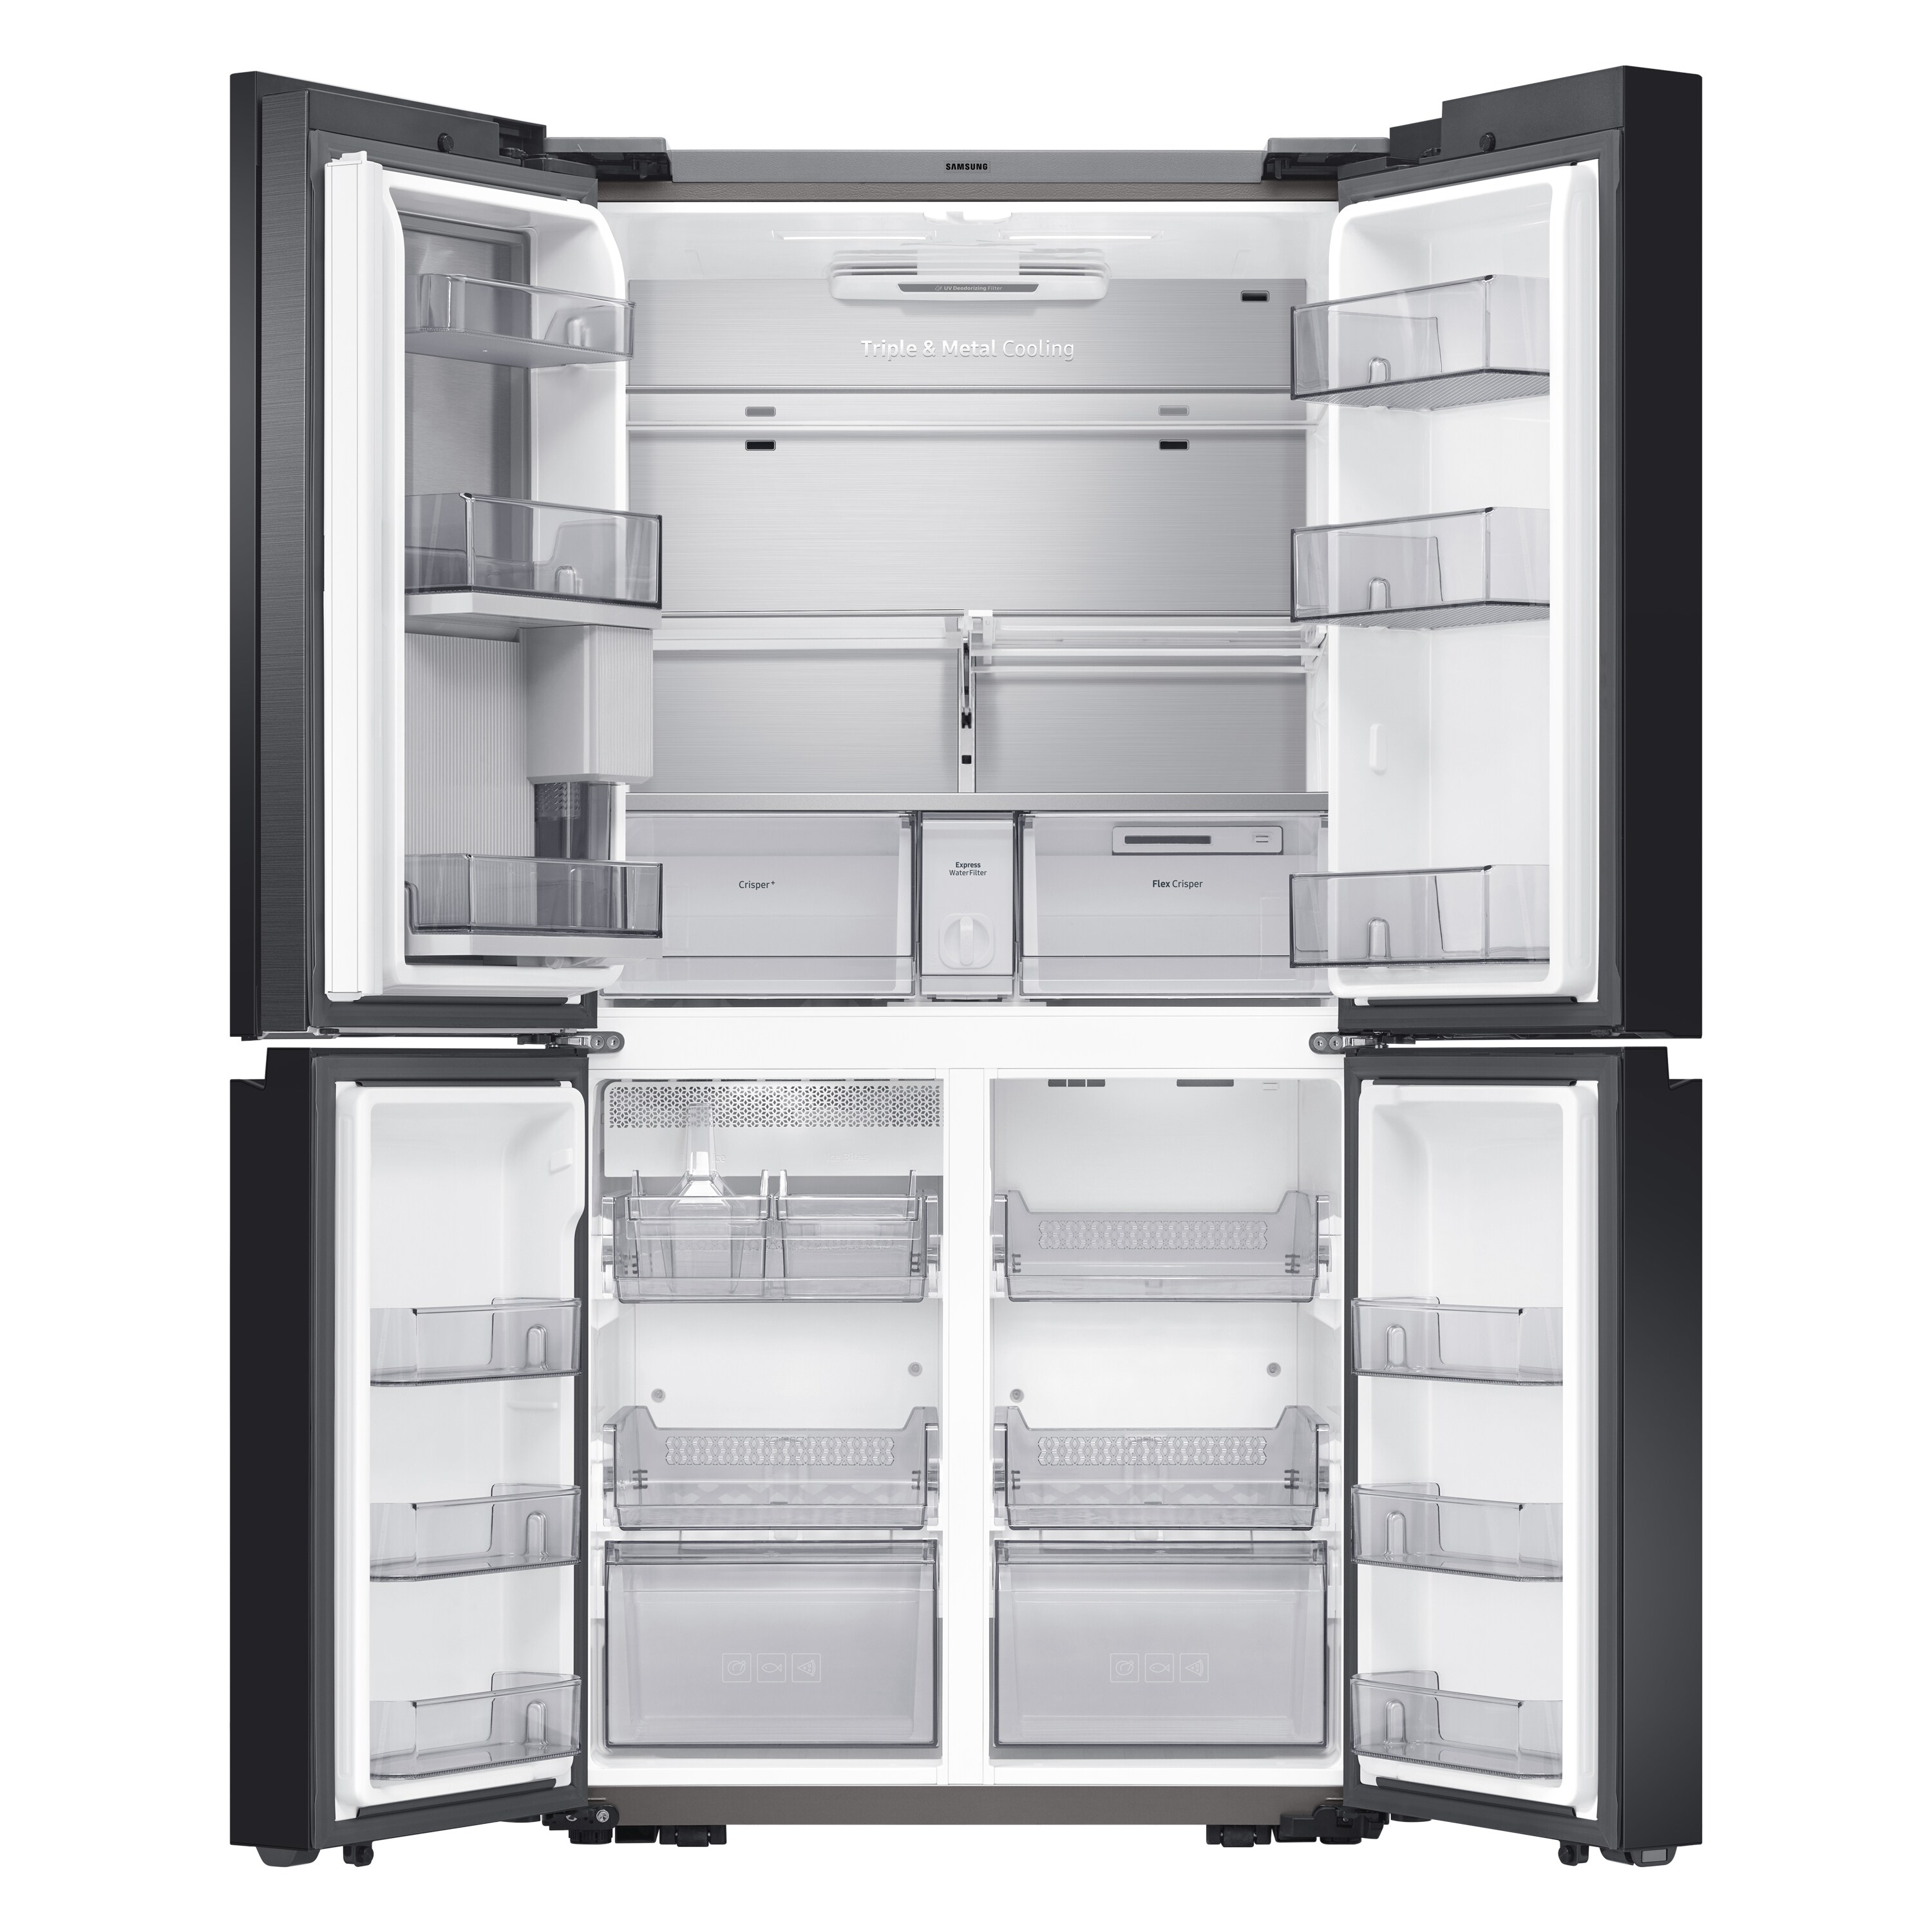 Samsung Expands Bespoke Refrigerator Lineup with New Side-By-Side Model -  Samsung US Newsroom